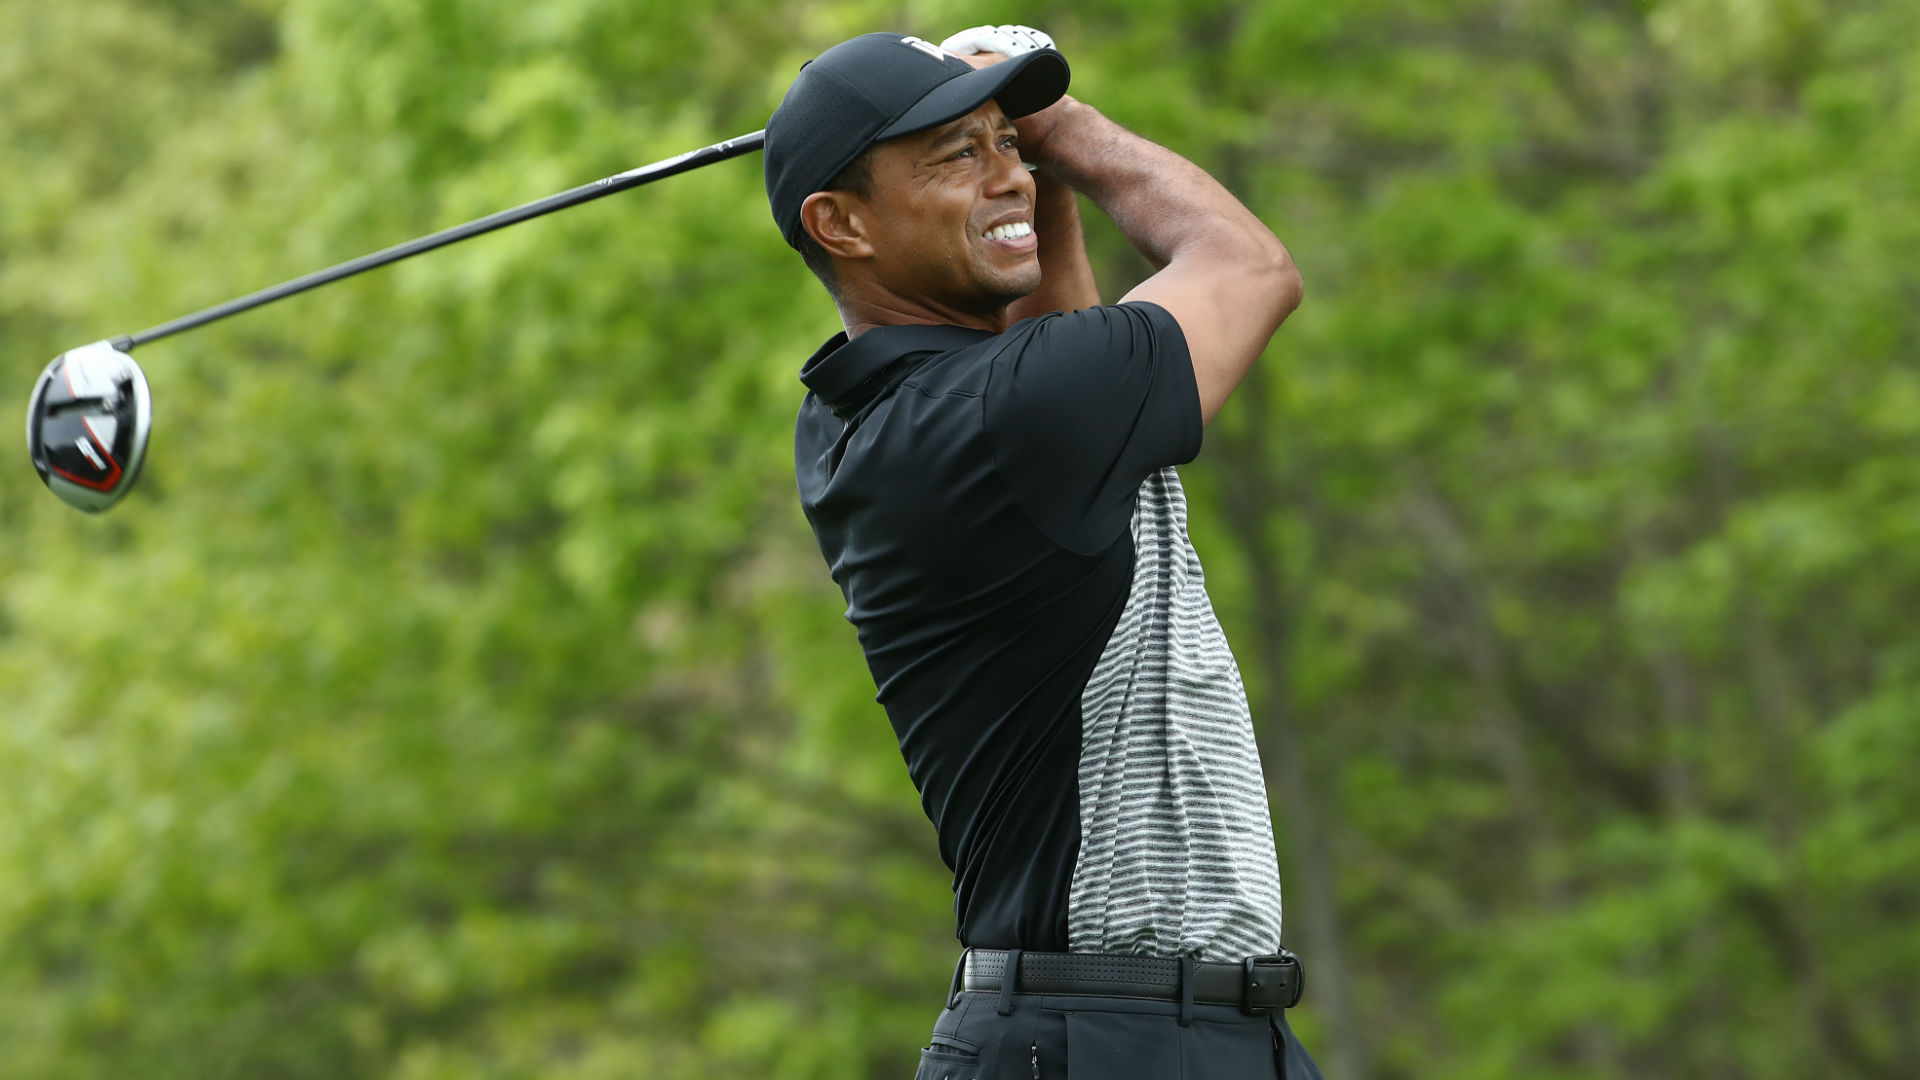 Tiger Woods' score: Round 2 results, highlights from 2019 PGA Championship | Sporting News1920 x 1080